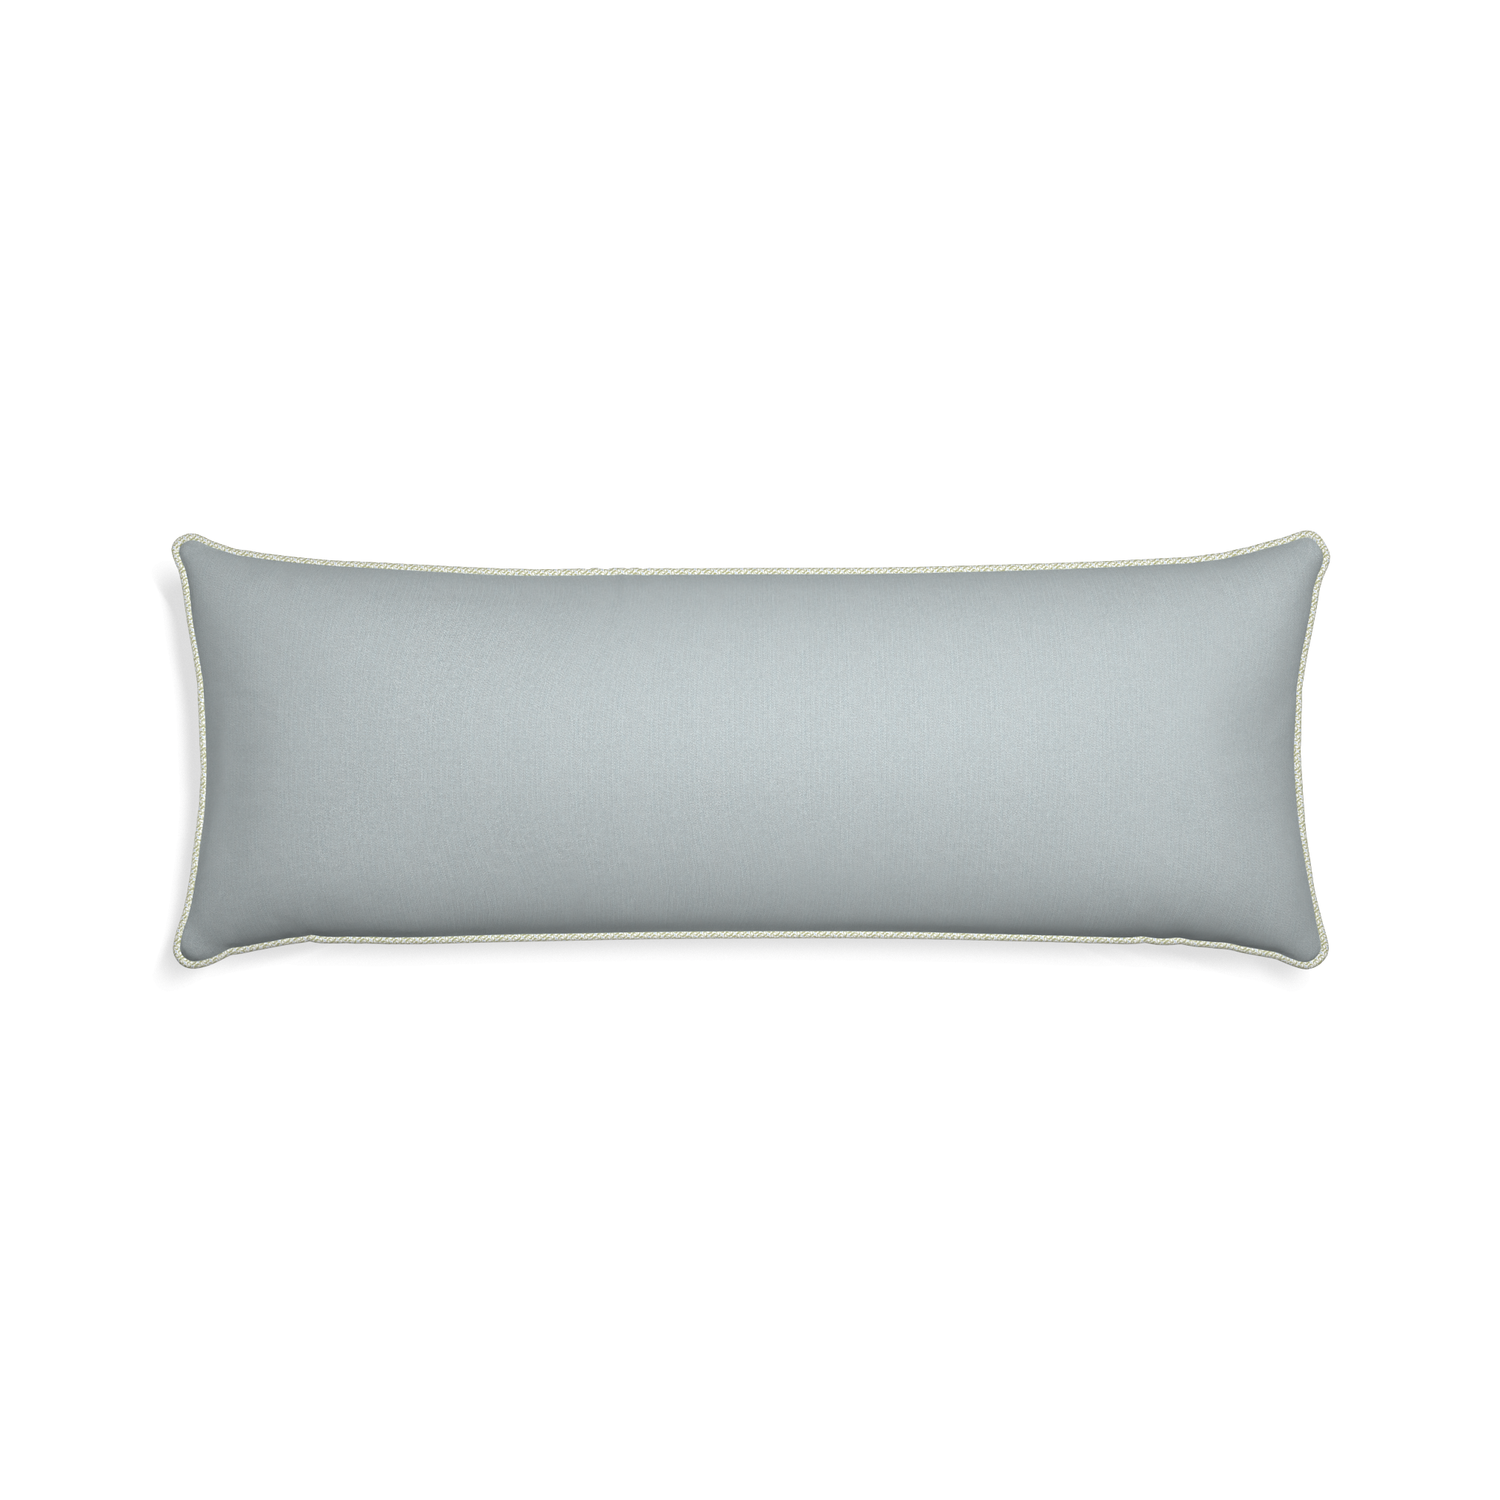 Xl-lumbar sea custom grey bluepillow with l piping on white background